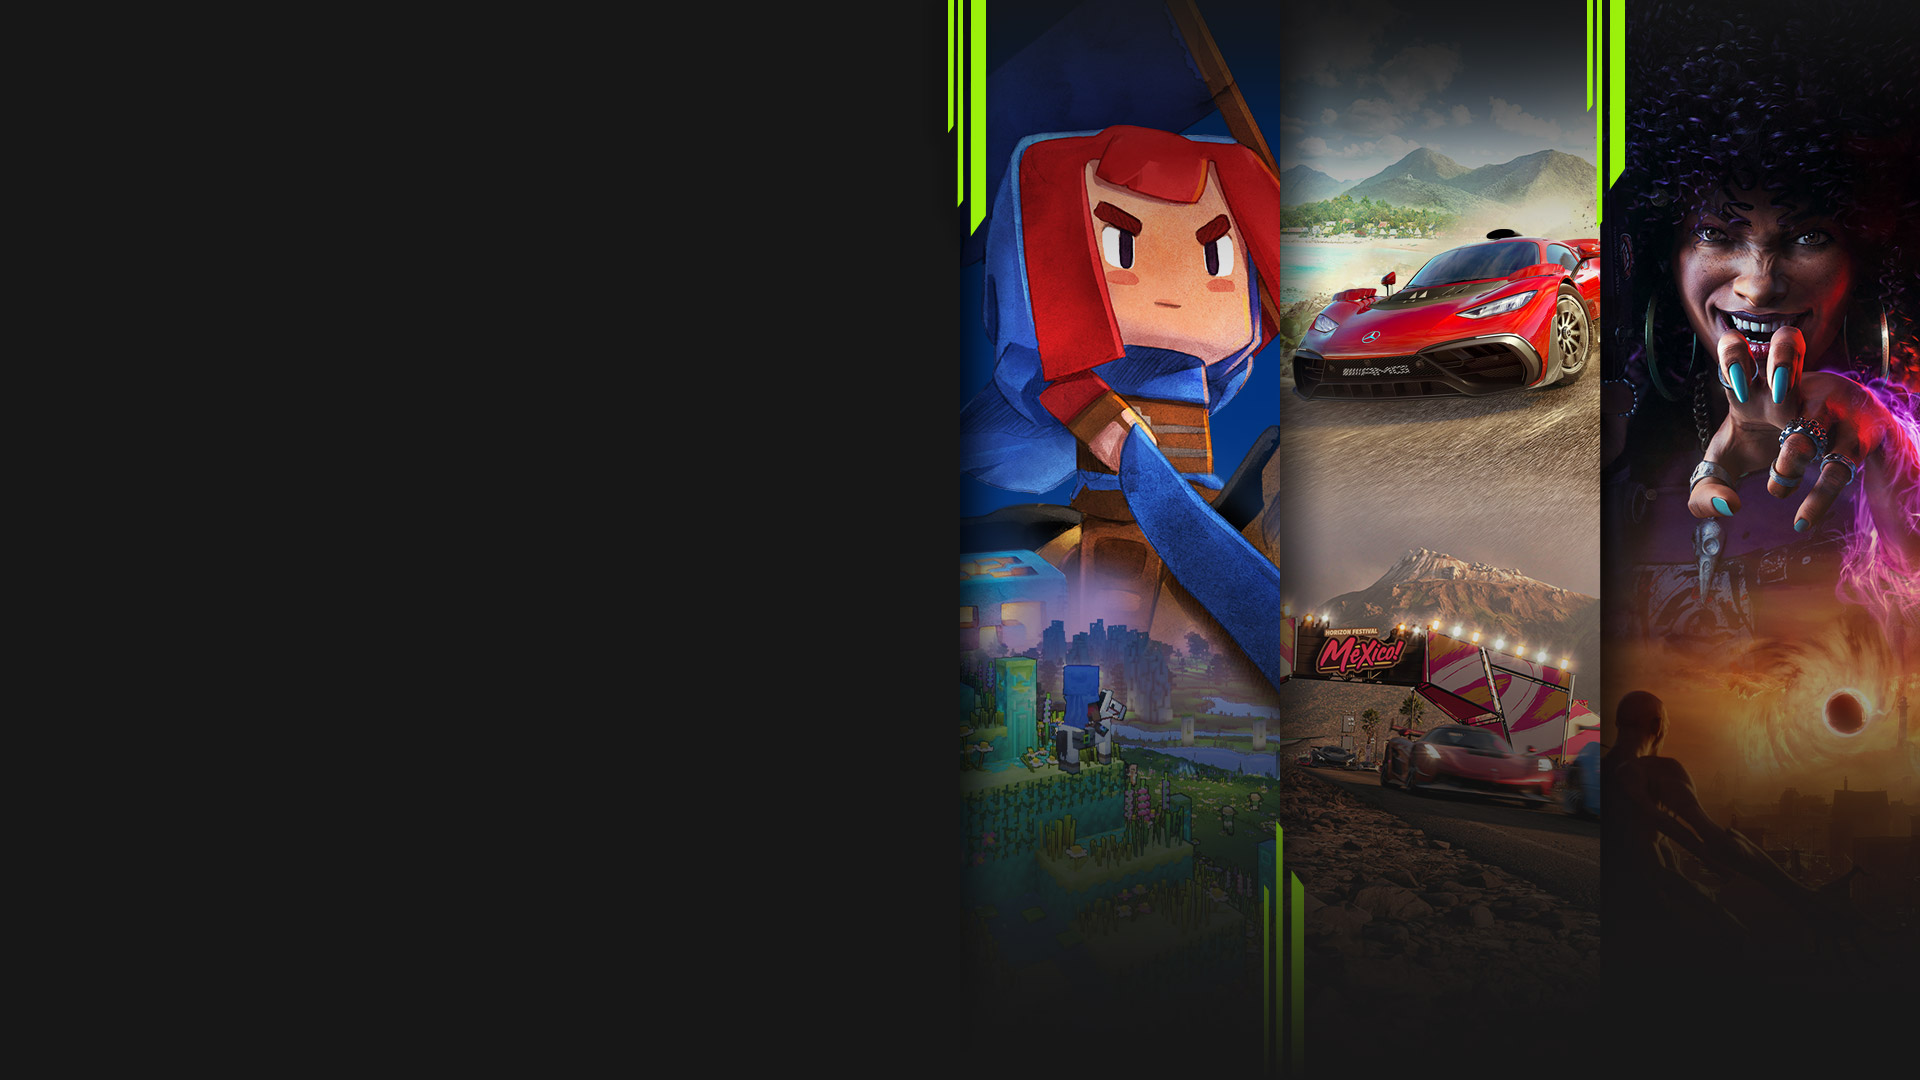 Game art from multiple games available with PC Game Pass, including Minecraft Legends, Forza Horizon 5, Redfall and BlazBlue: Cross Tag Battle.